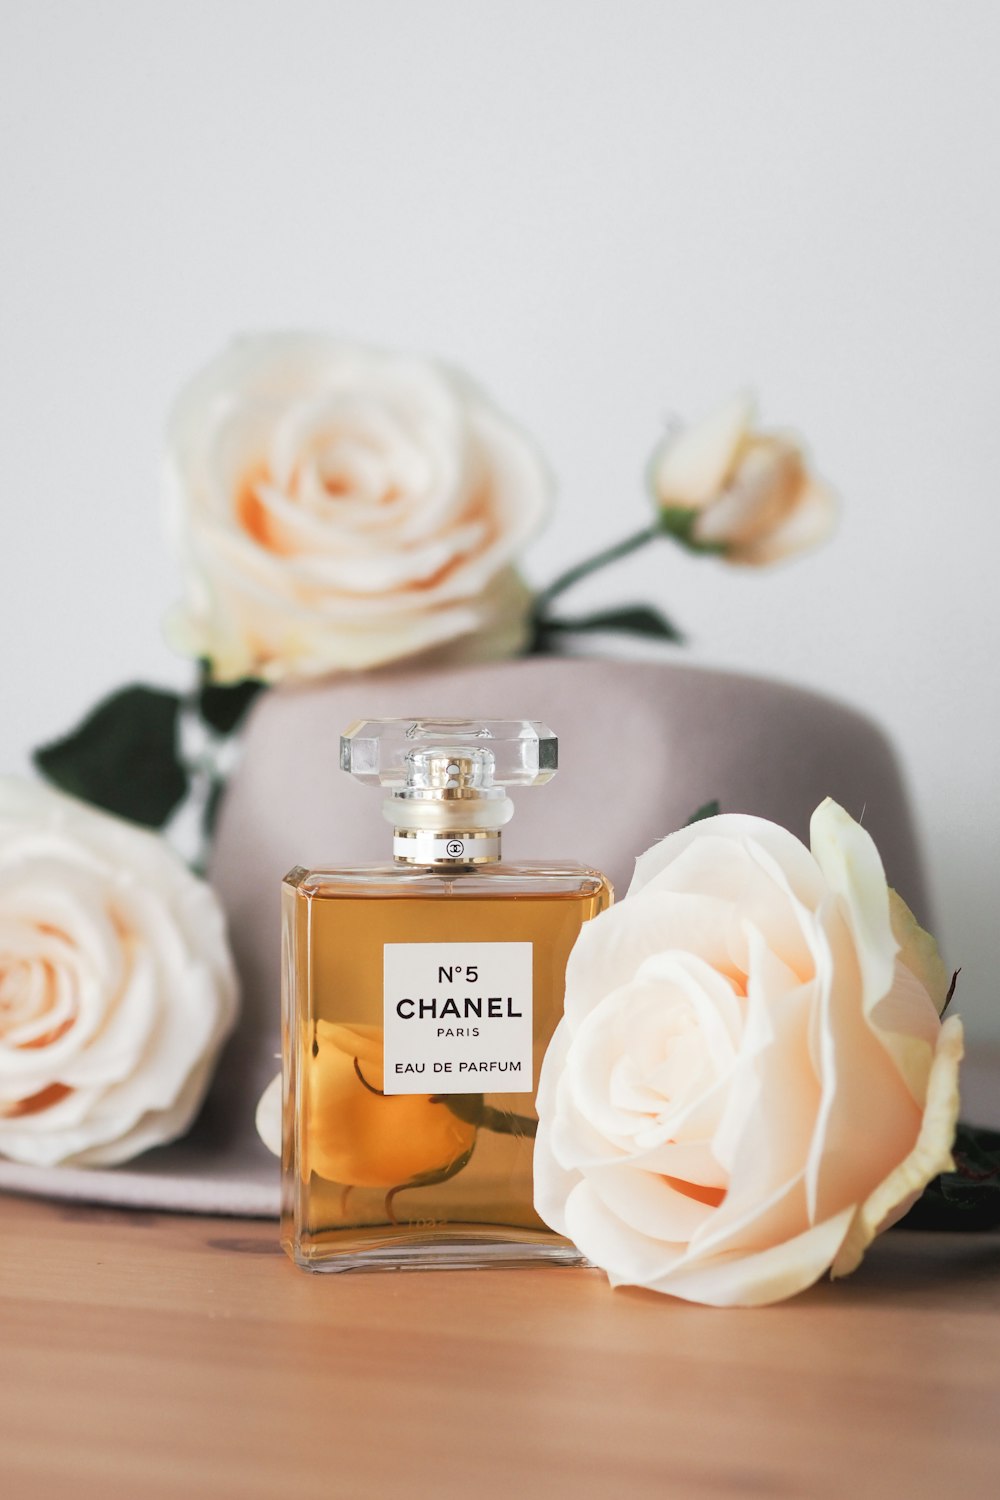 a bottle of chanel perfume next to a hat and flowers